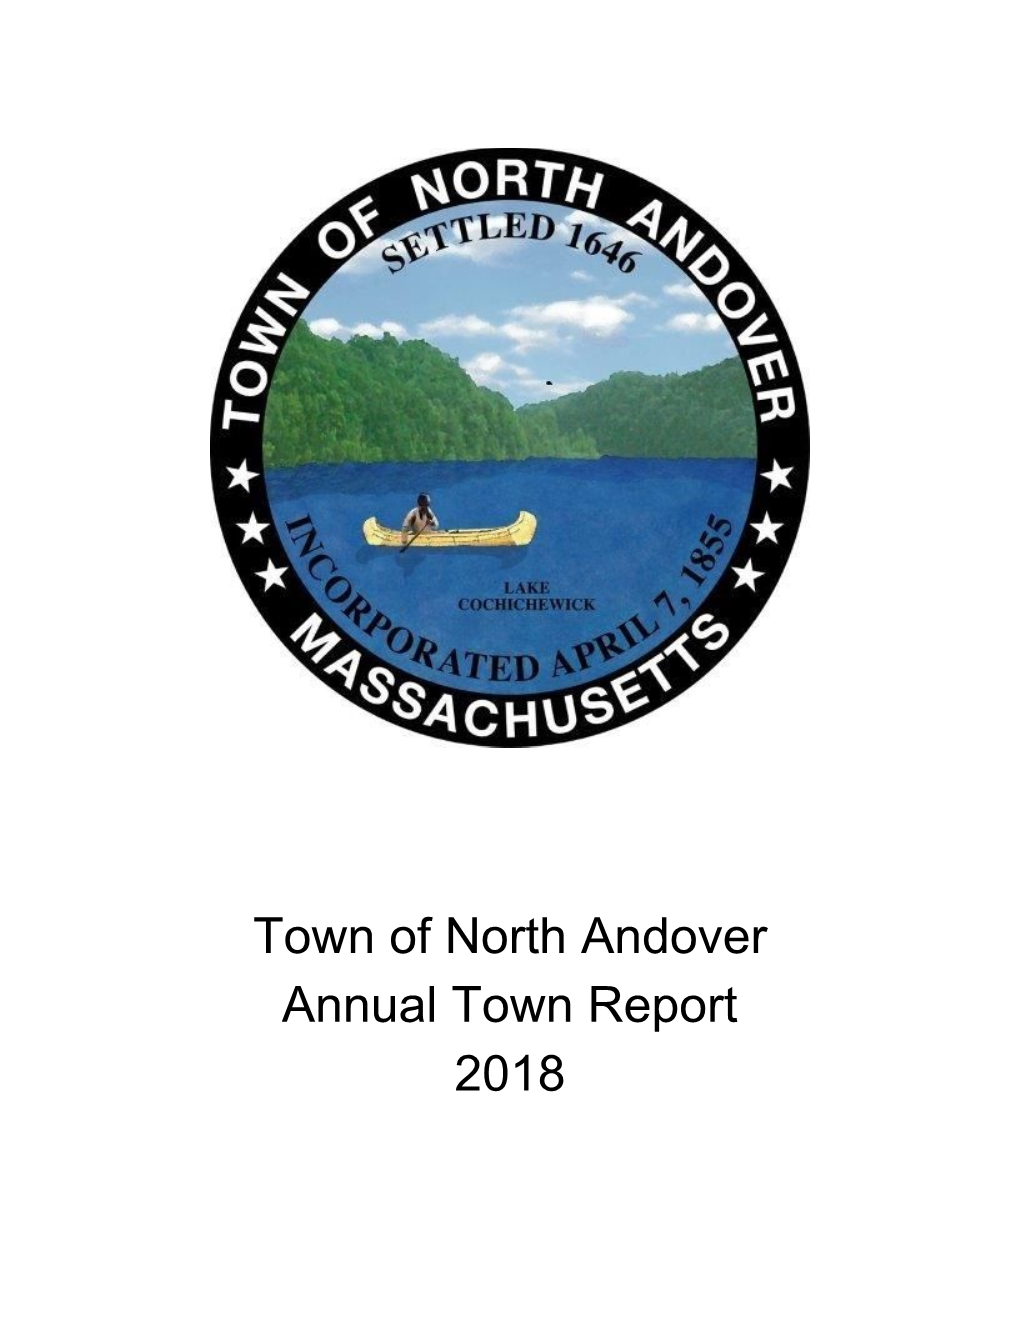 Town of North Andover Annual Town Report 2018